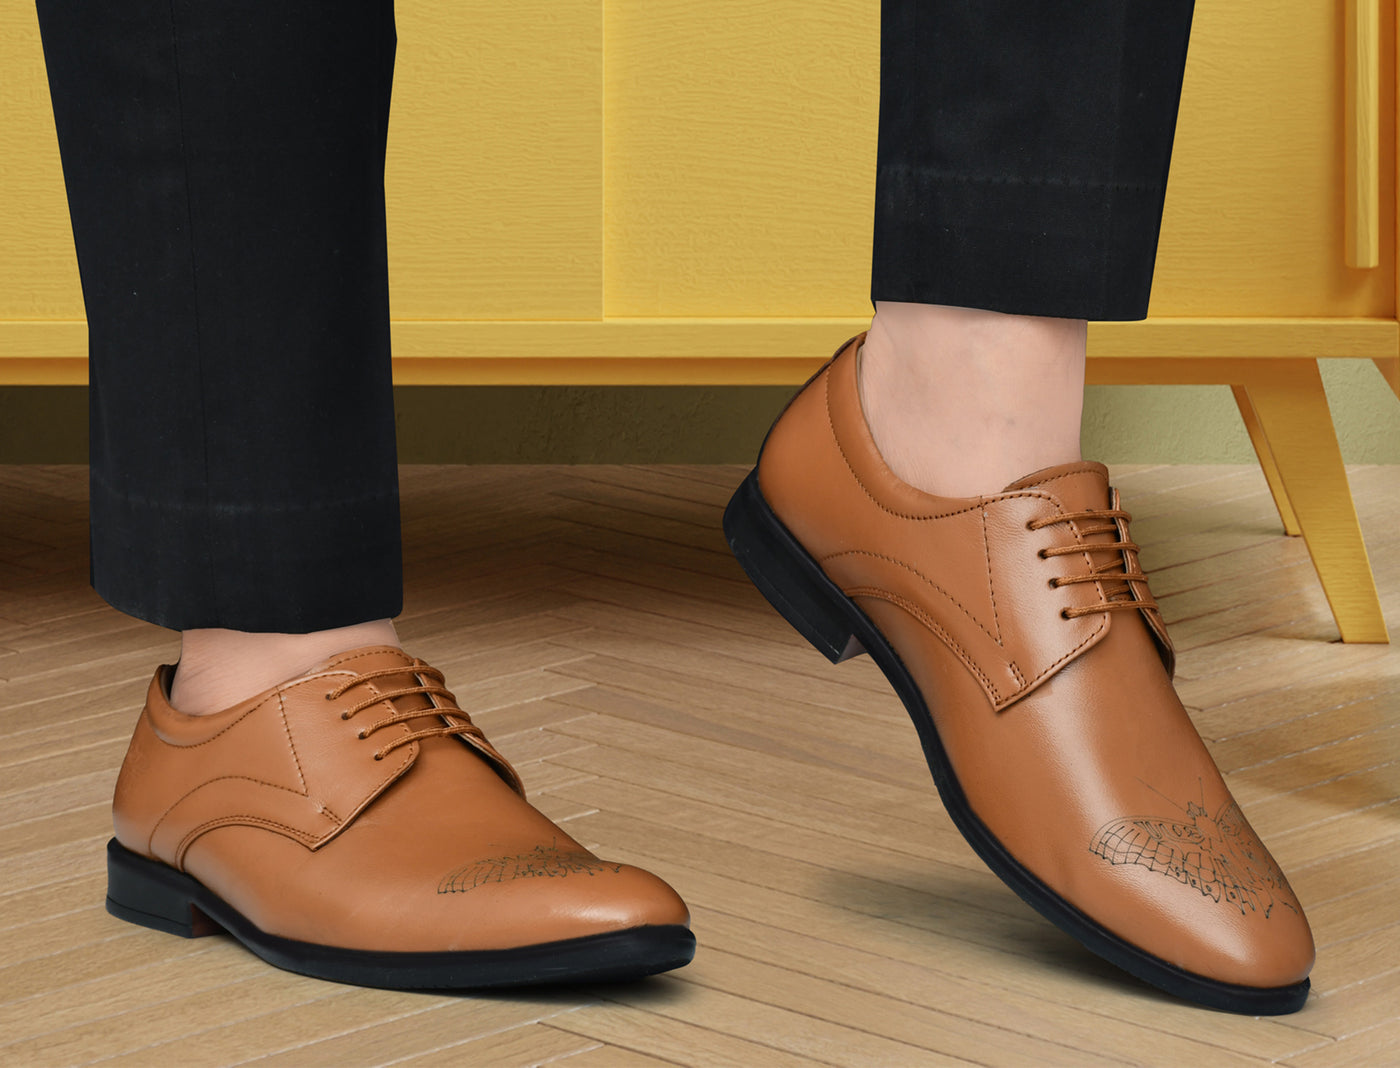 PILLAA Impeccable Lace-Up Formal Shoes